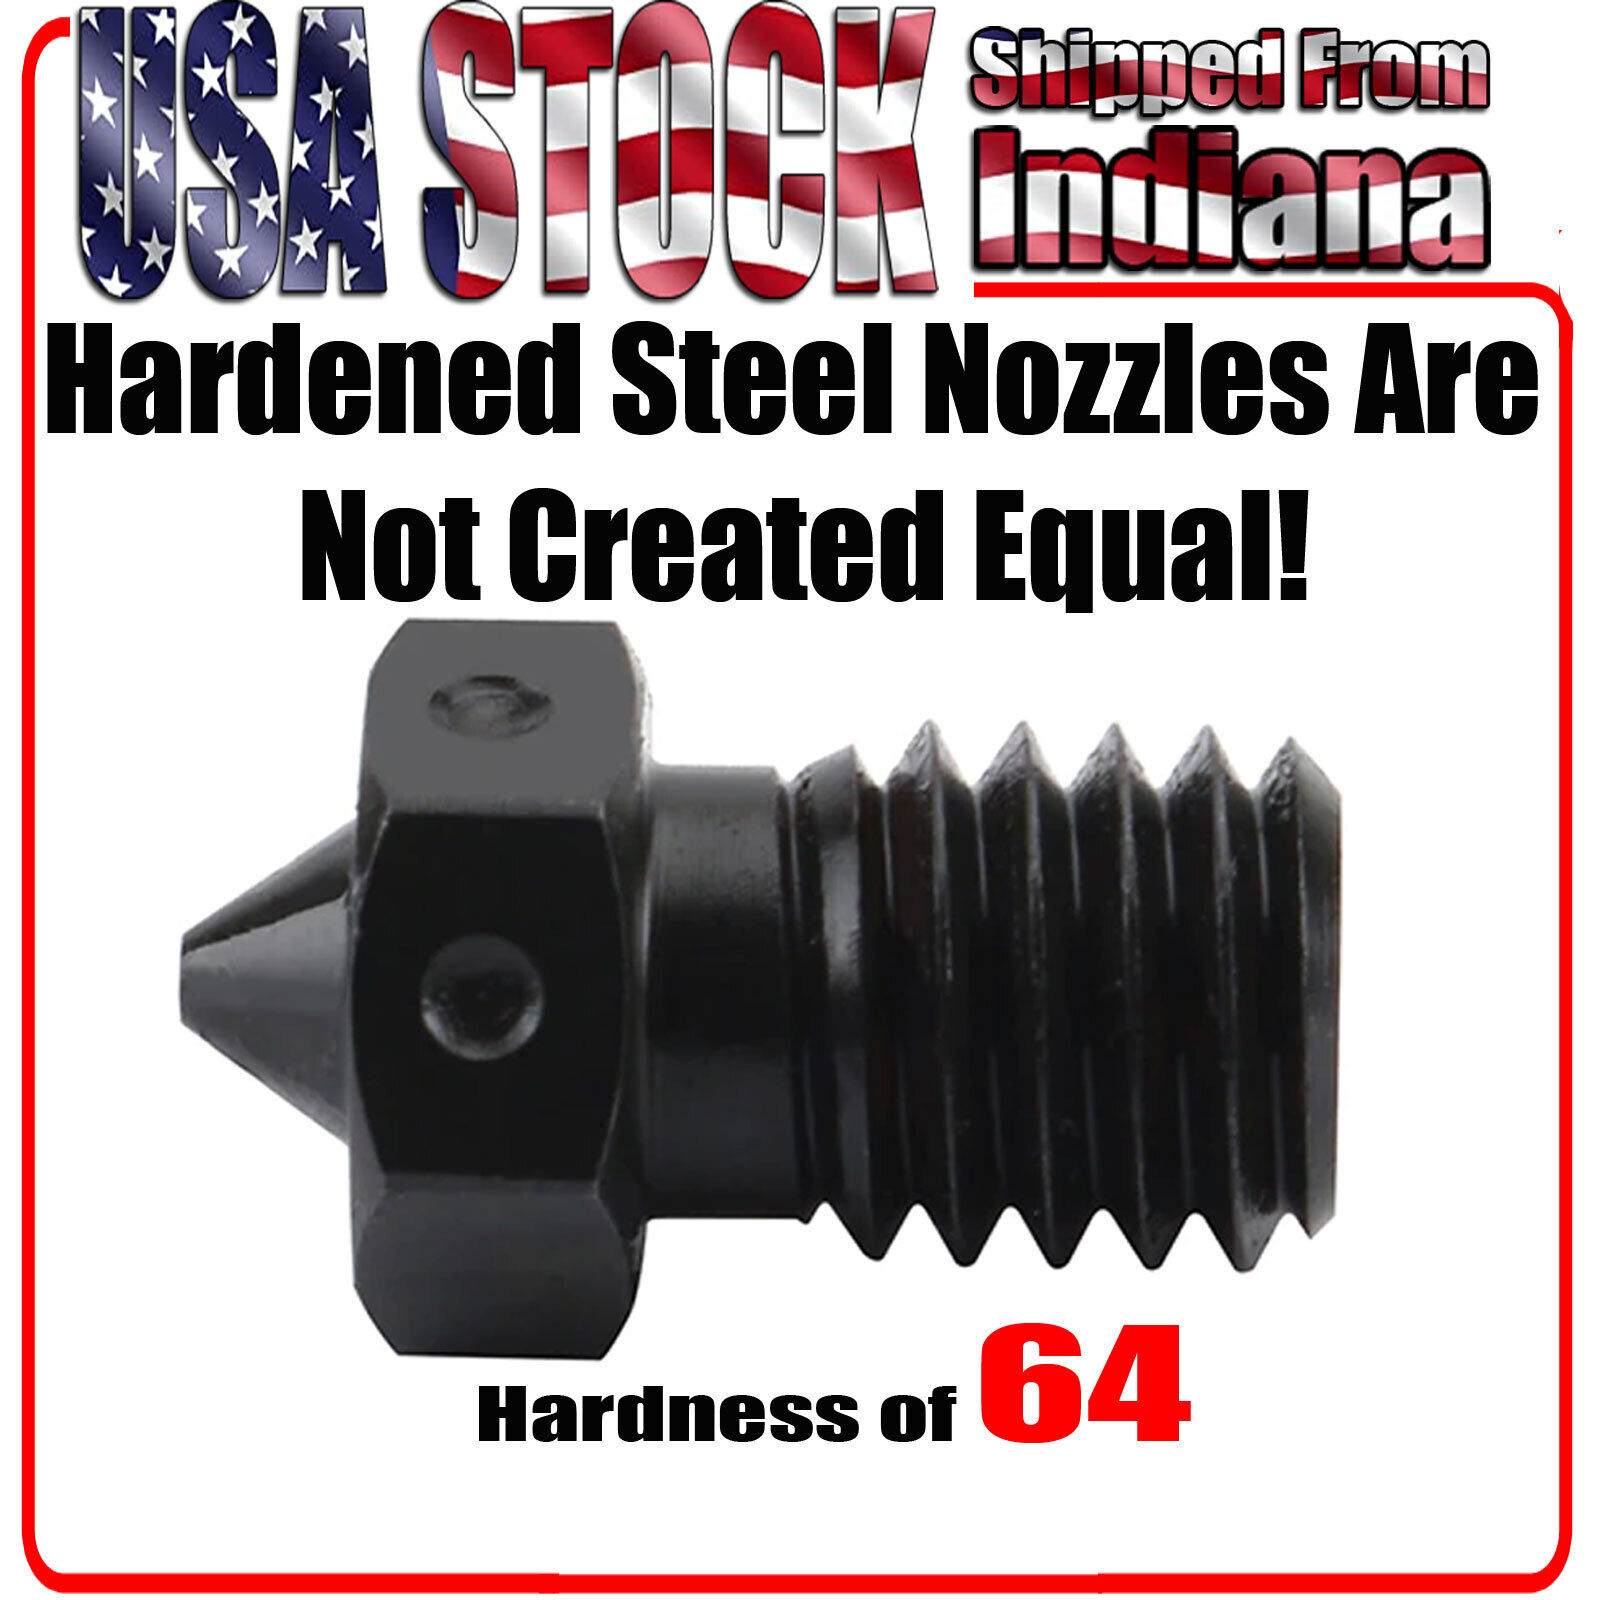 V6 Nozzles Hardened Steel for High Temp and Abrasive Filaments, V6 Hotend Nozzle